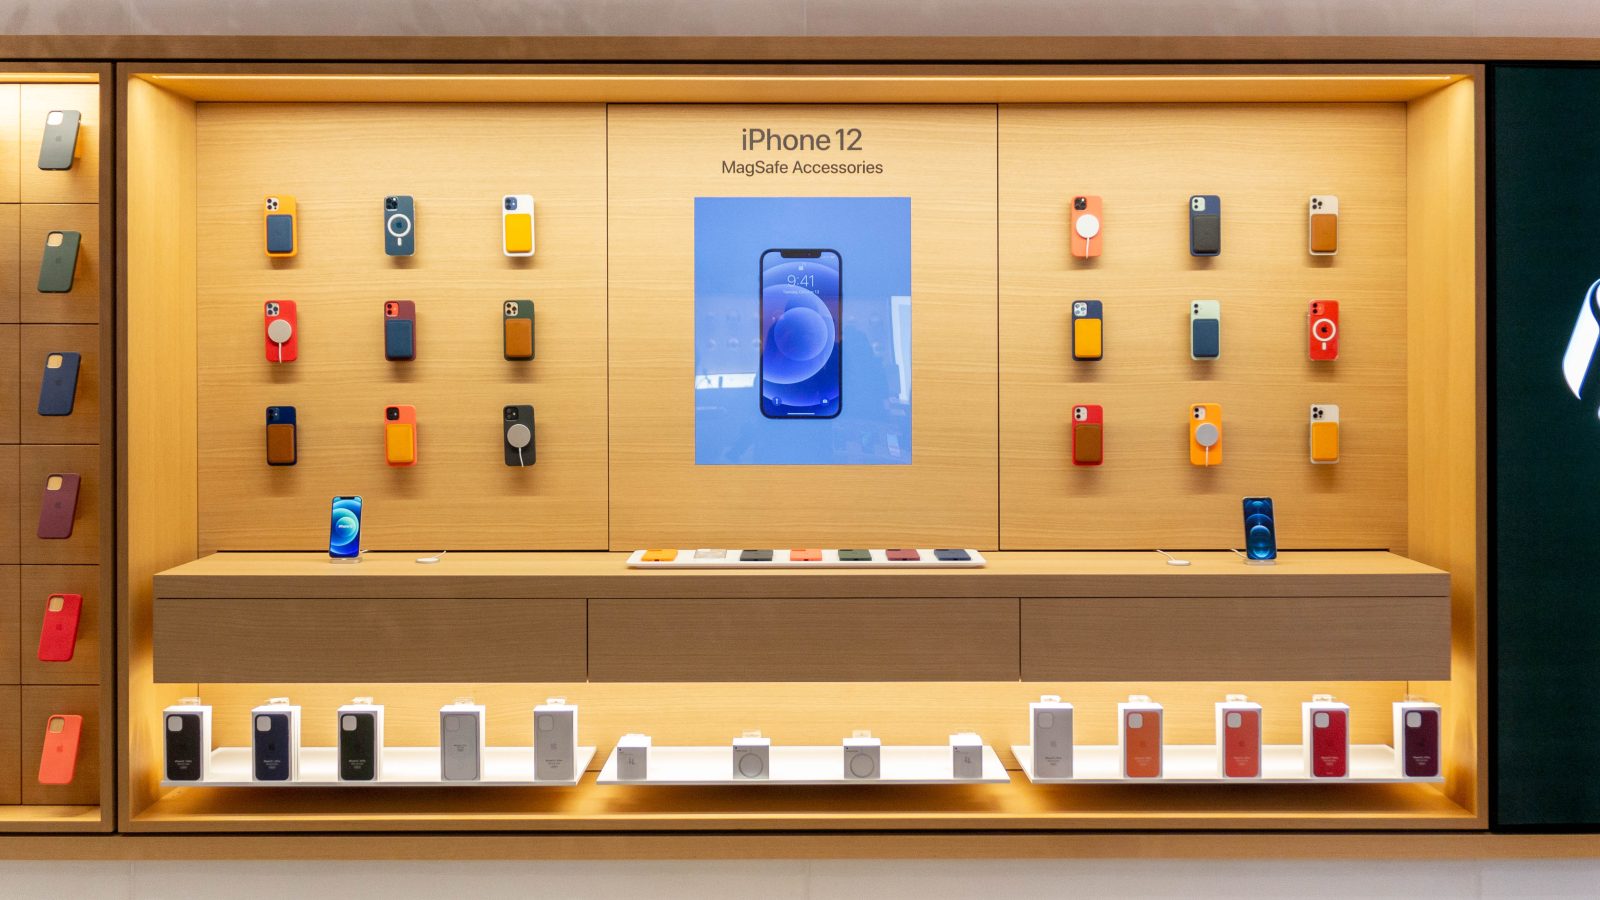 Stores highlight iPhone 12 accessories with interactive displays - 9to5Mac